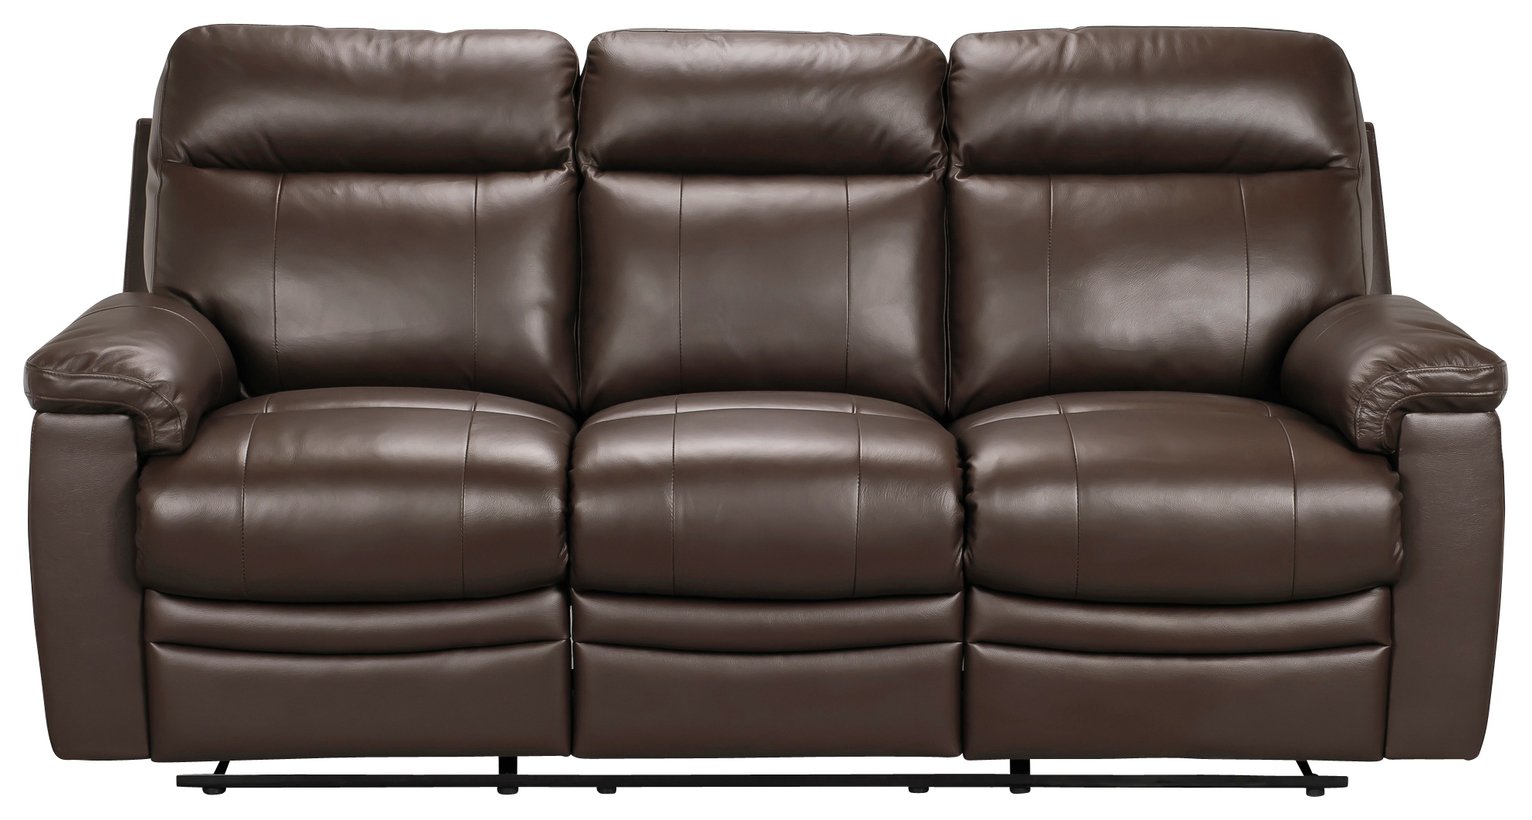 Argos Home New Paolo Large Manual Recliner - Sofa/Chair Reviews